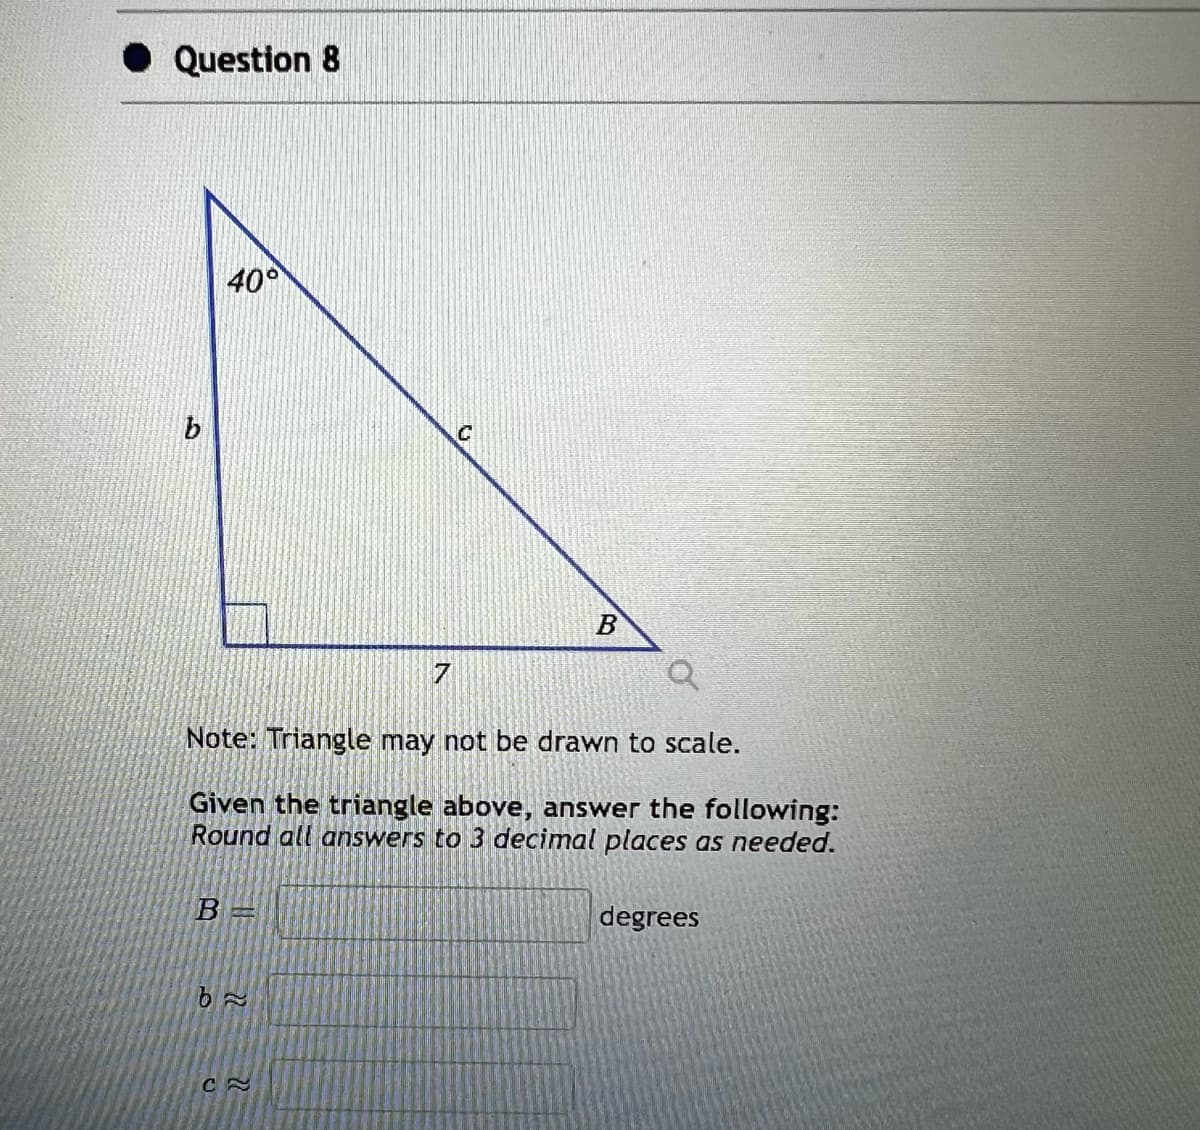 Question 8
40°
B=
៦~
7
Q
Note: Triangle may not be drawn to scale.
Given the triangle above, answer the following:
Round all answers to 3 decimal places as needed.
CA
C
B
degrees